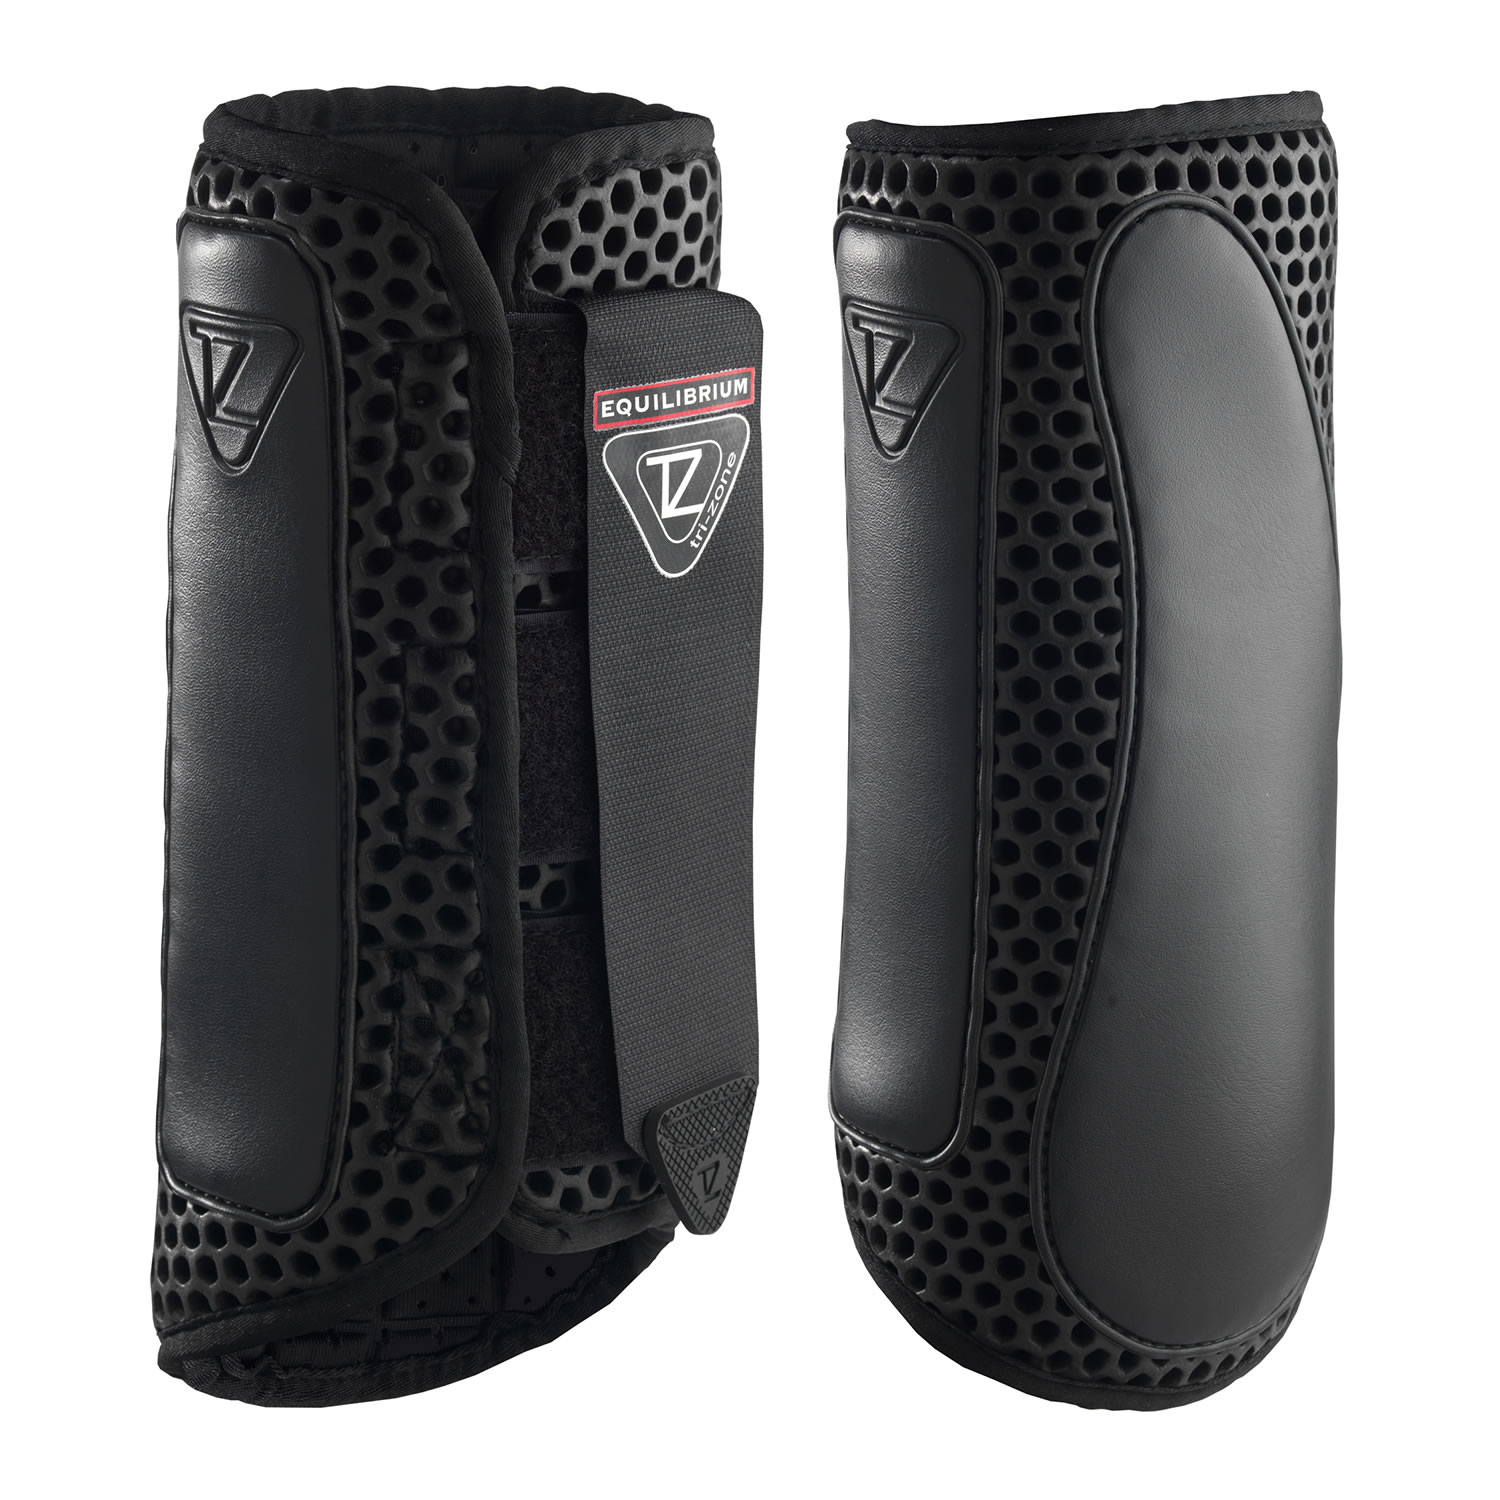 EQUILIBRIUM TRI-ZONE IMPACT SPORTS BOOTS BLACK HIND XSMALL HIND XSMALL HIND